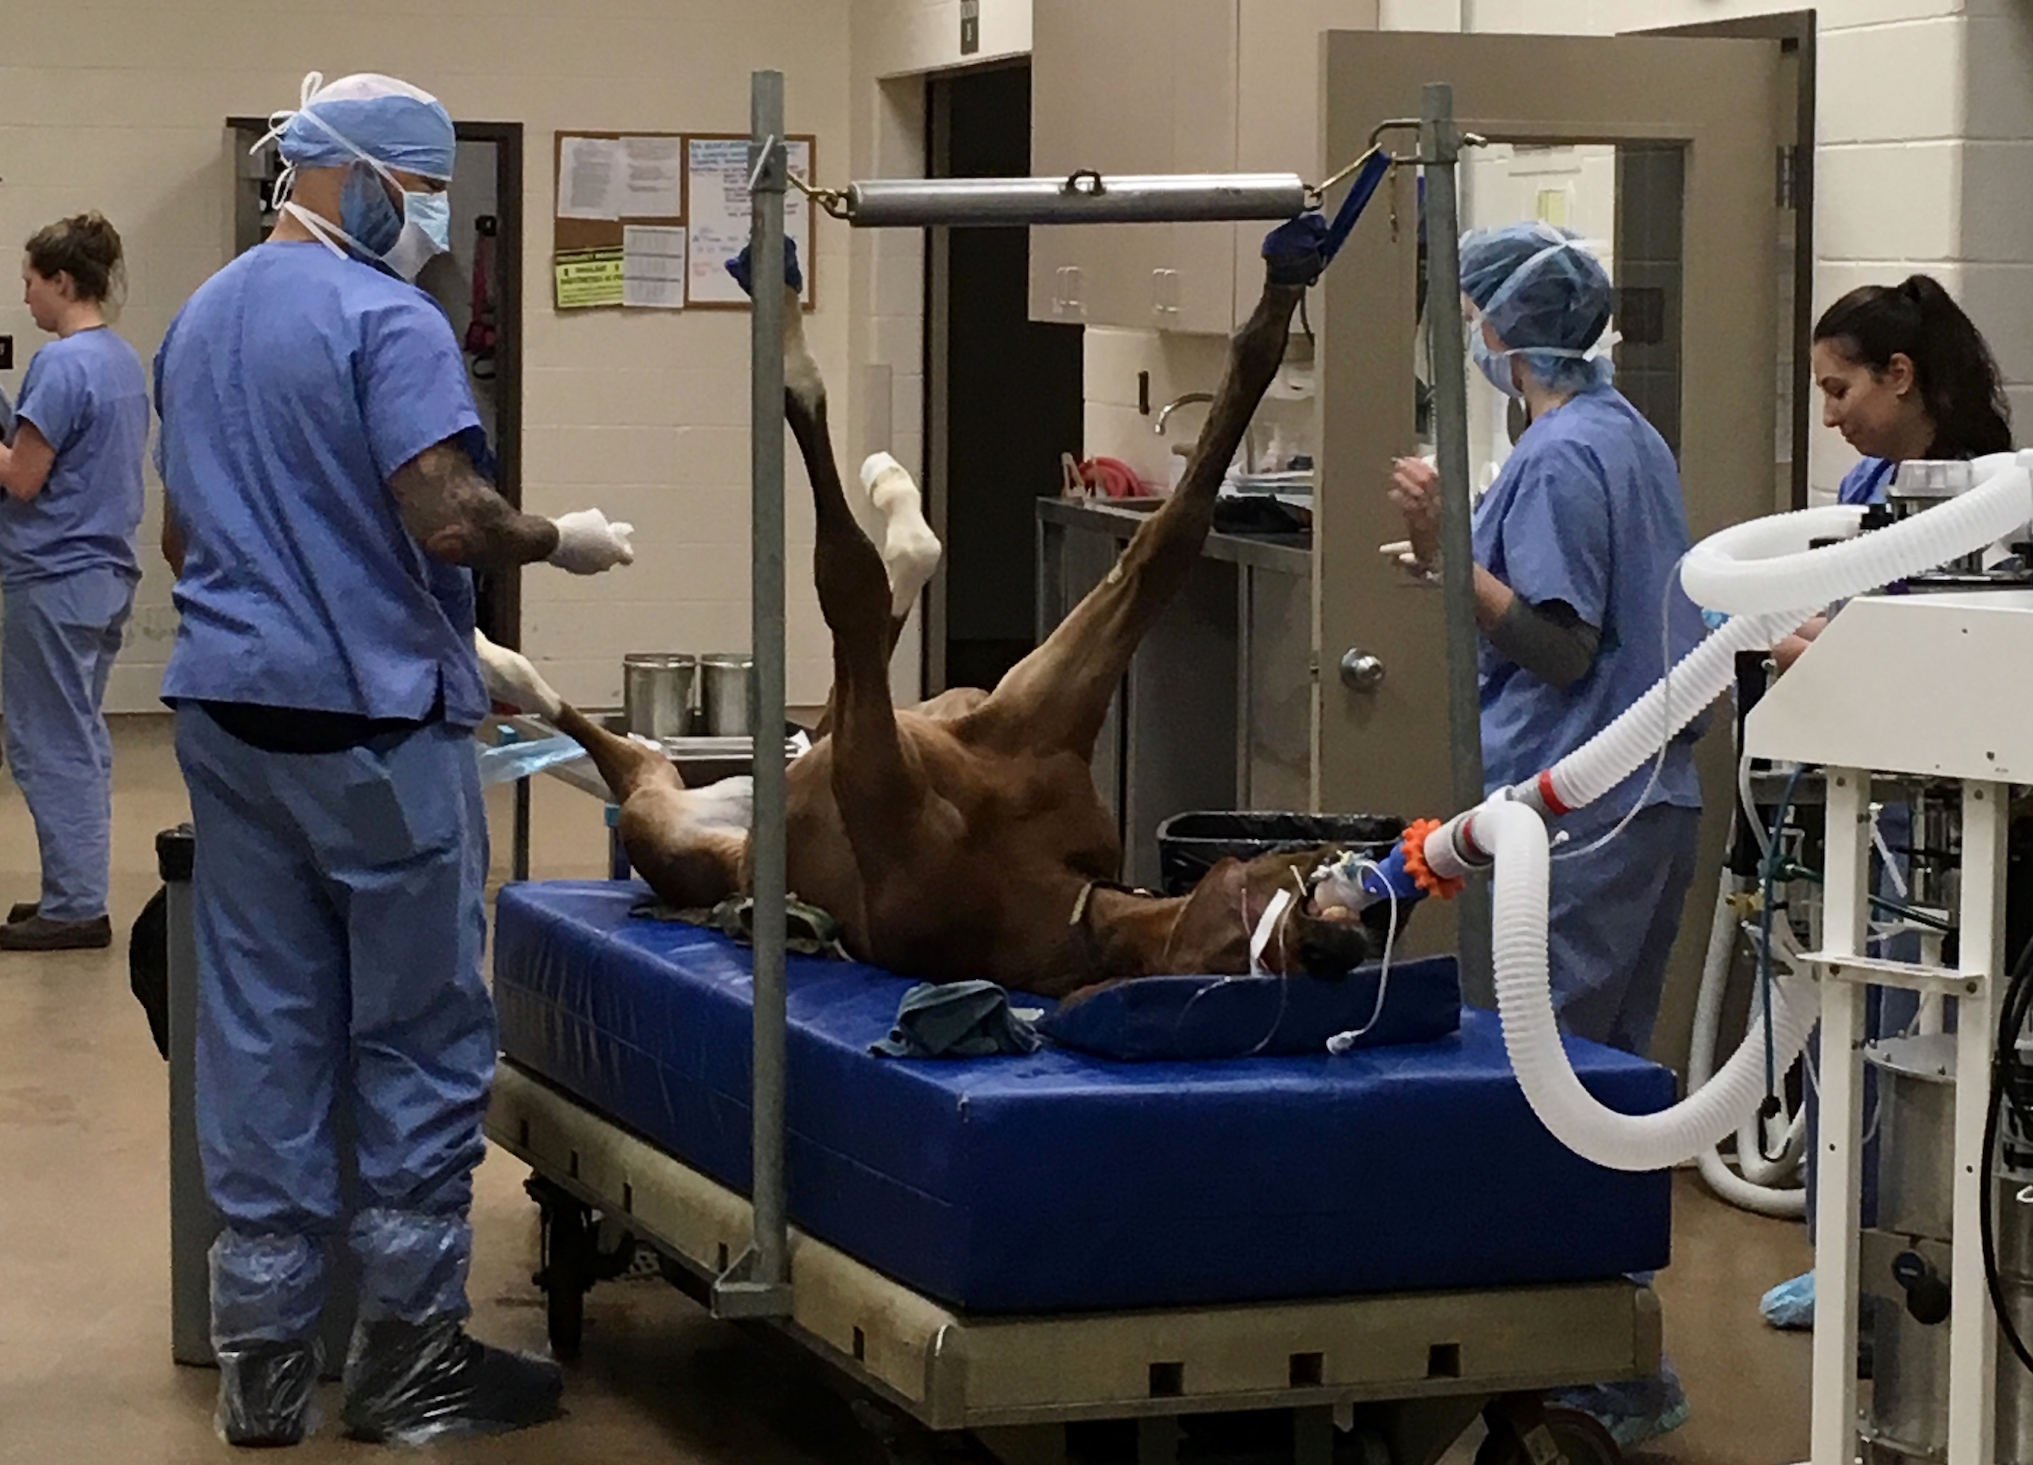 Ready to operate: a foal being prepped for surgery at Rood & Riddle Equine Hospital. Photo: Amanda Duckworth